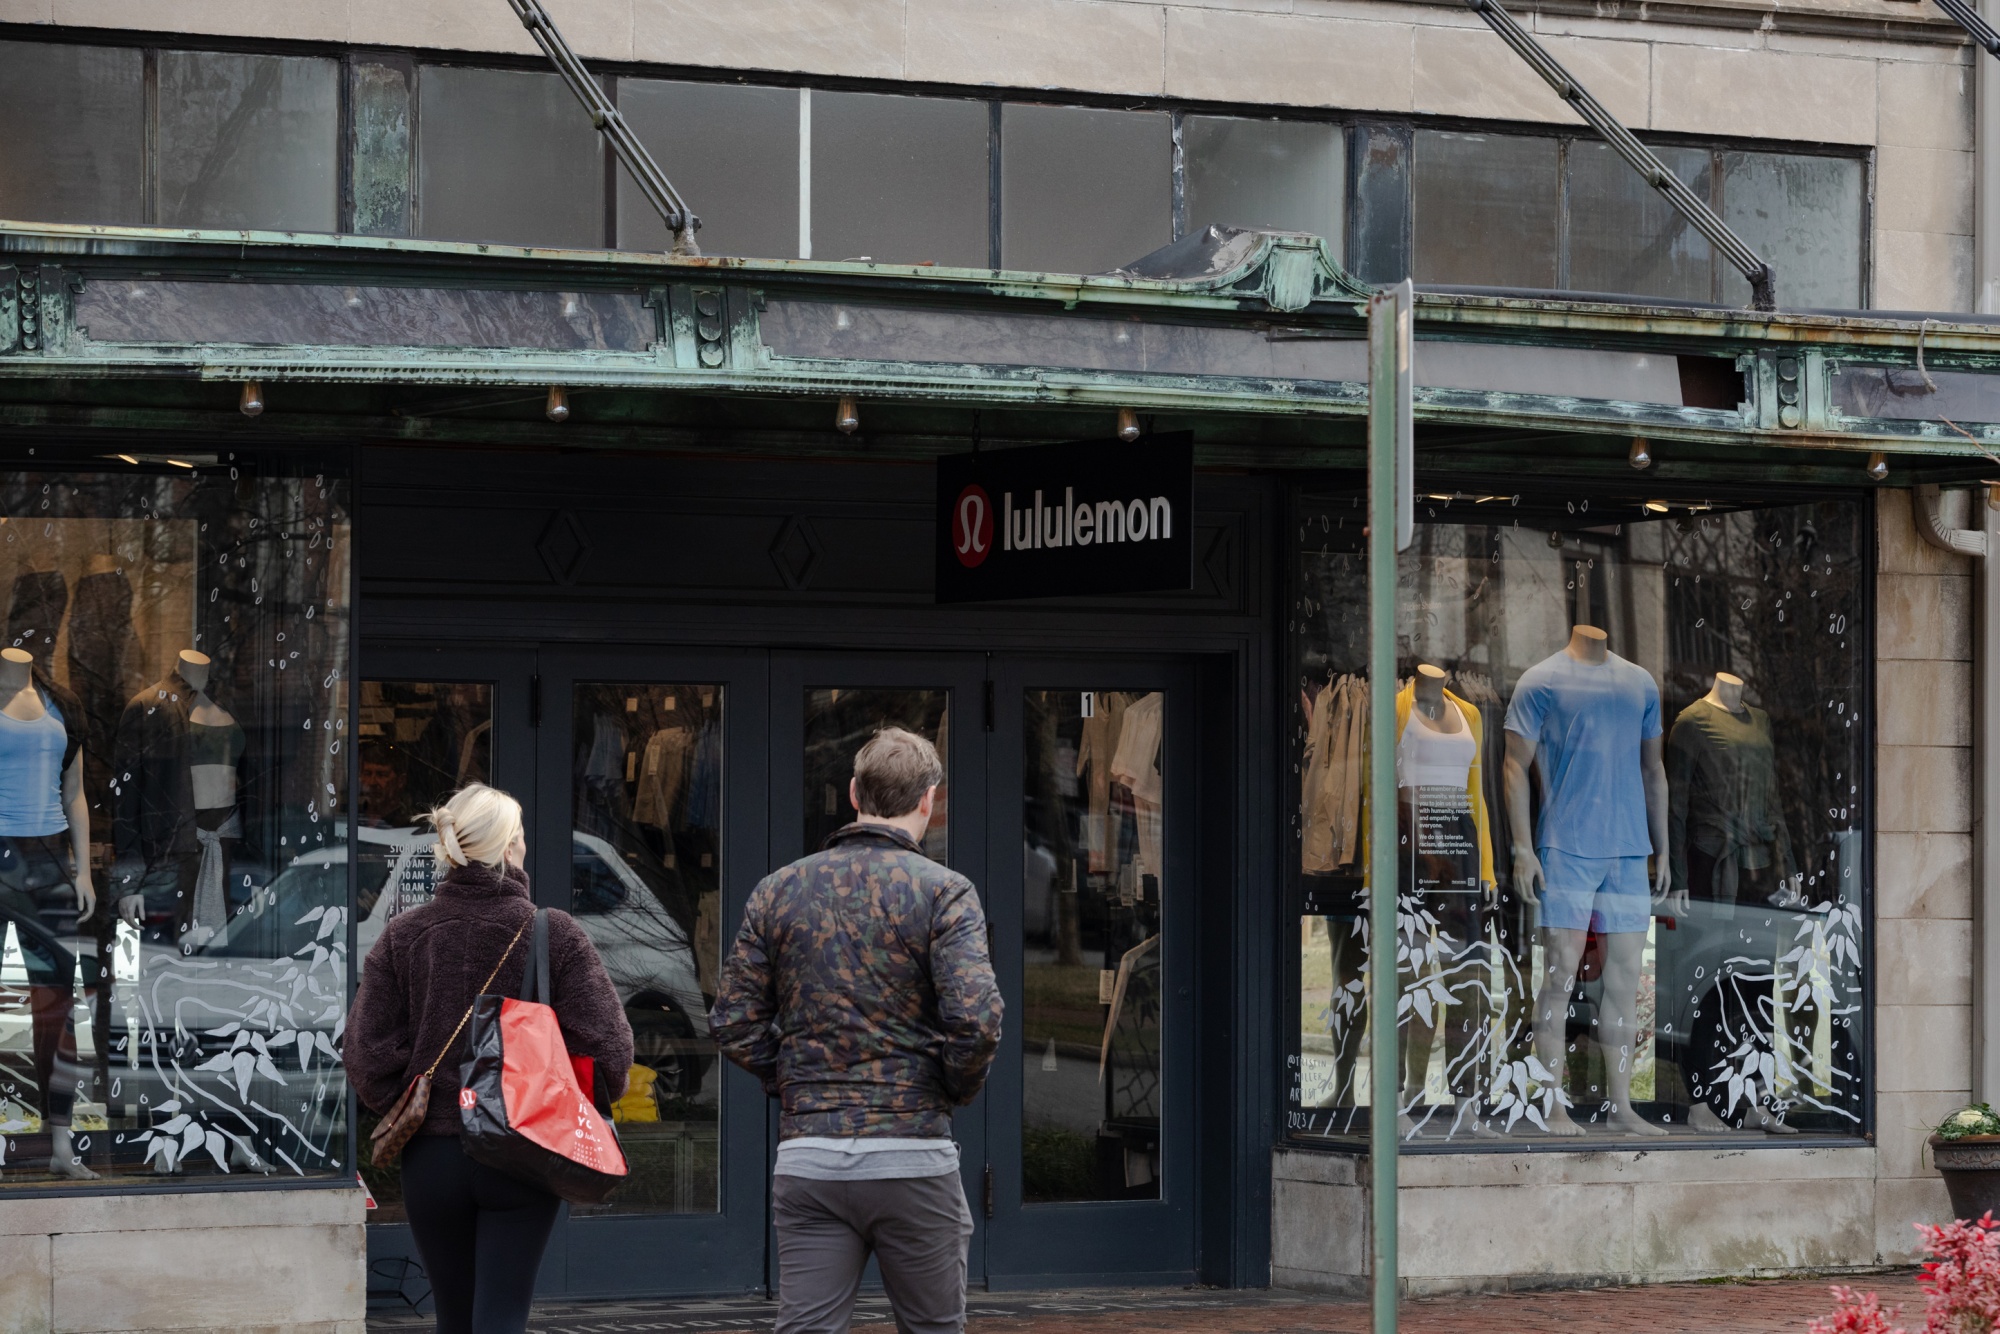 Lululemon Faces Pressure From Yoga Community Over Climate Action - Bloomberg